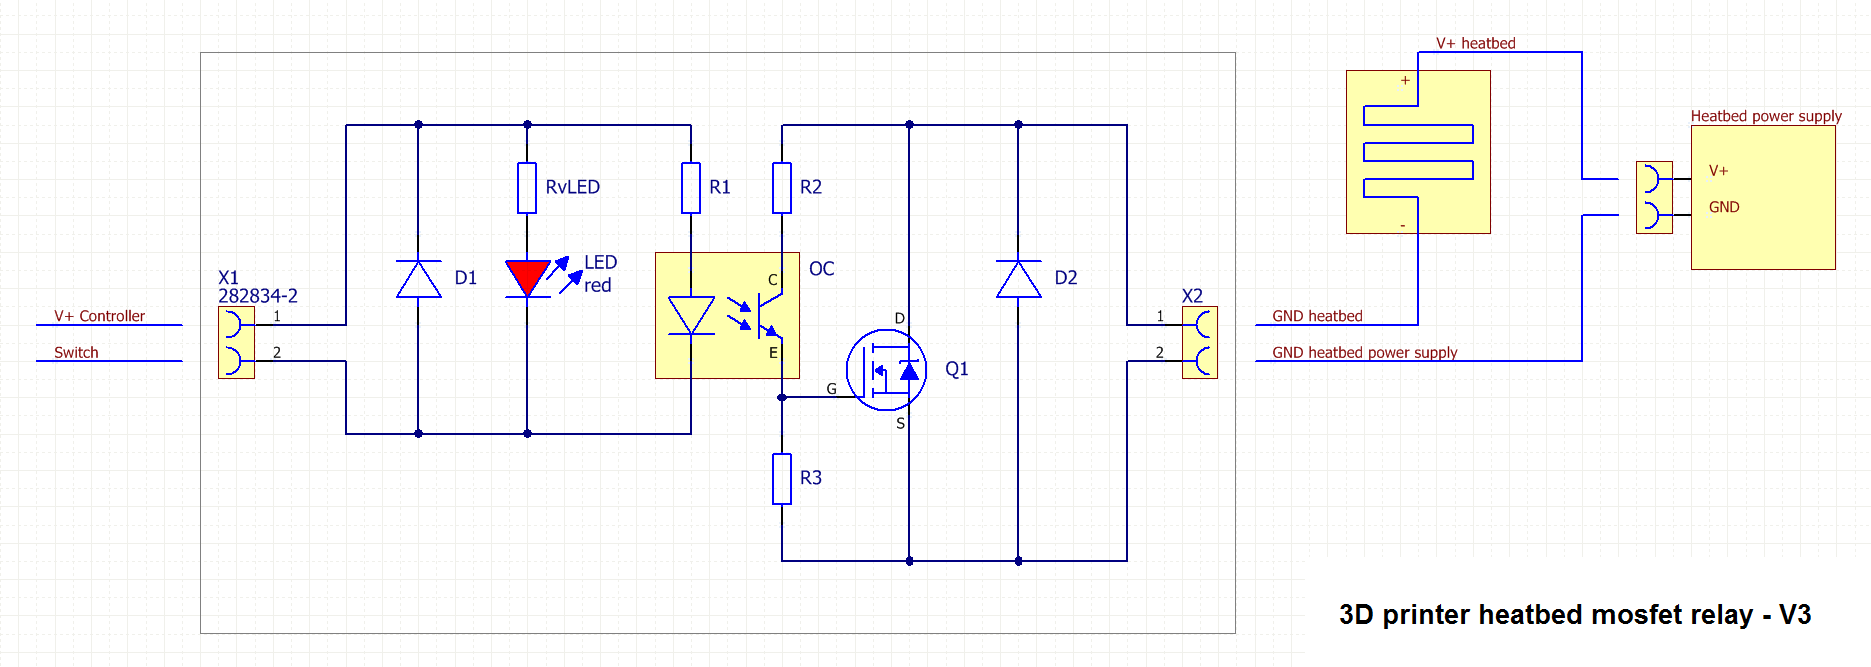 PROTOTYPE: Heated bed mosfet relay V3